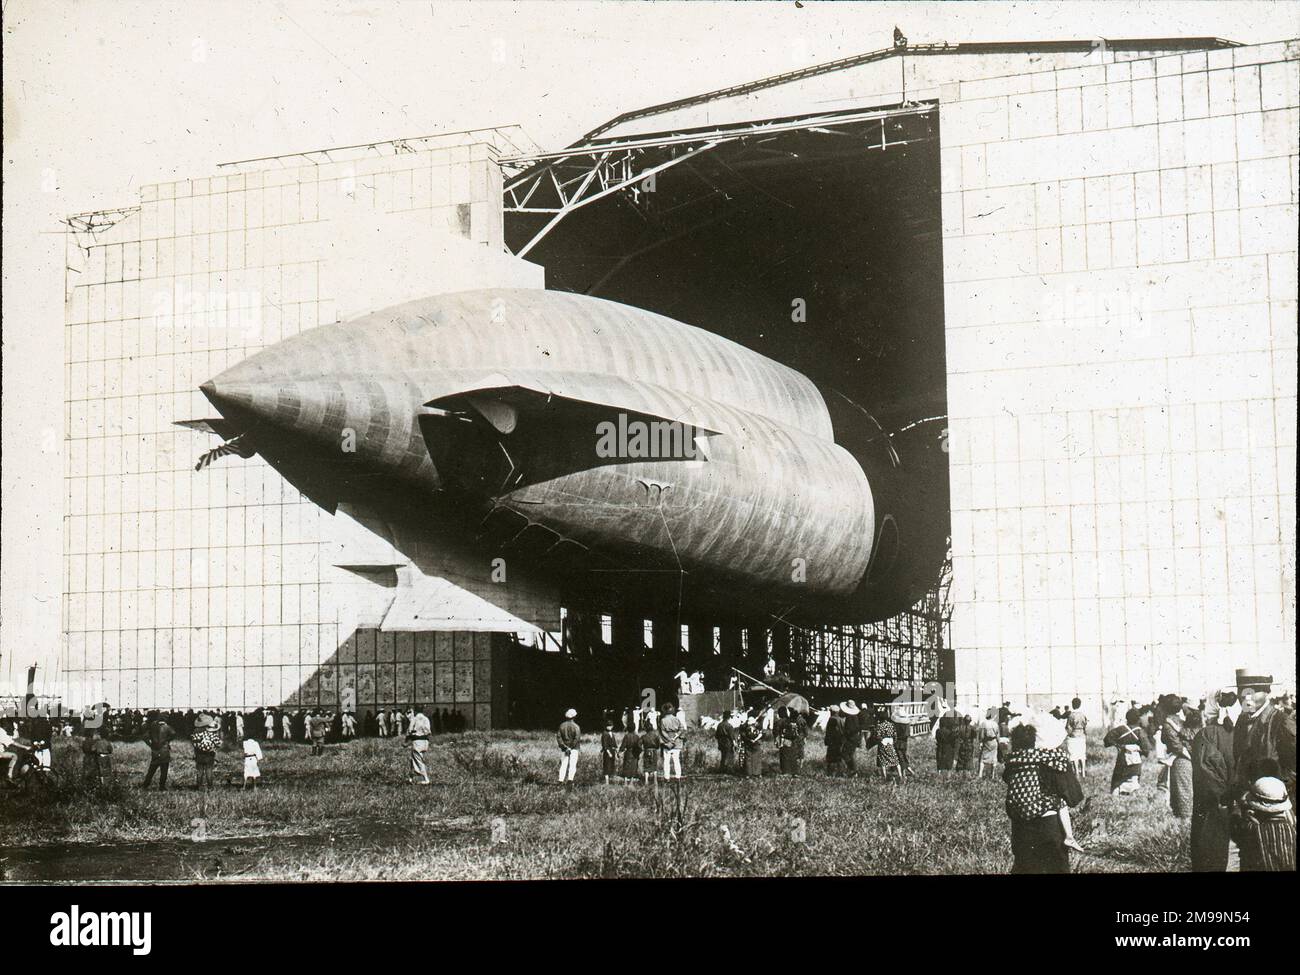 Airship coming out of shed. William Francis Forbes-Sempill, 19th Lord Sempill AFC, AFRAeS (1893-1965) was a Scottish peer and record-breaking air pioneer who was later shown to have passed secret information to the Imperial Japanese military before the Second World War. In 1921, Sempill led an official military mission to Japan that showcased the latest British aircraft. In subsequent years he continued to aid the Imperial Japanese Navy in developing its Navy Air Service and began giving military secrets to the Japanese. Although his activities were uncovered by British Intelligence, Sempill Stock Photo